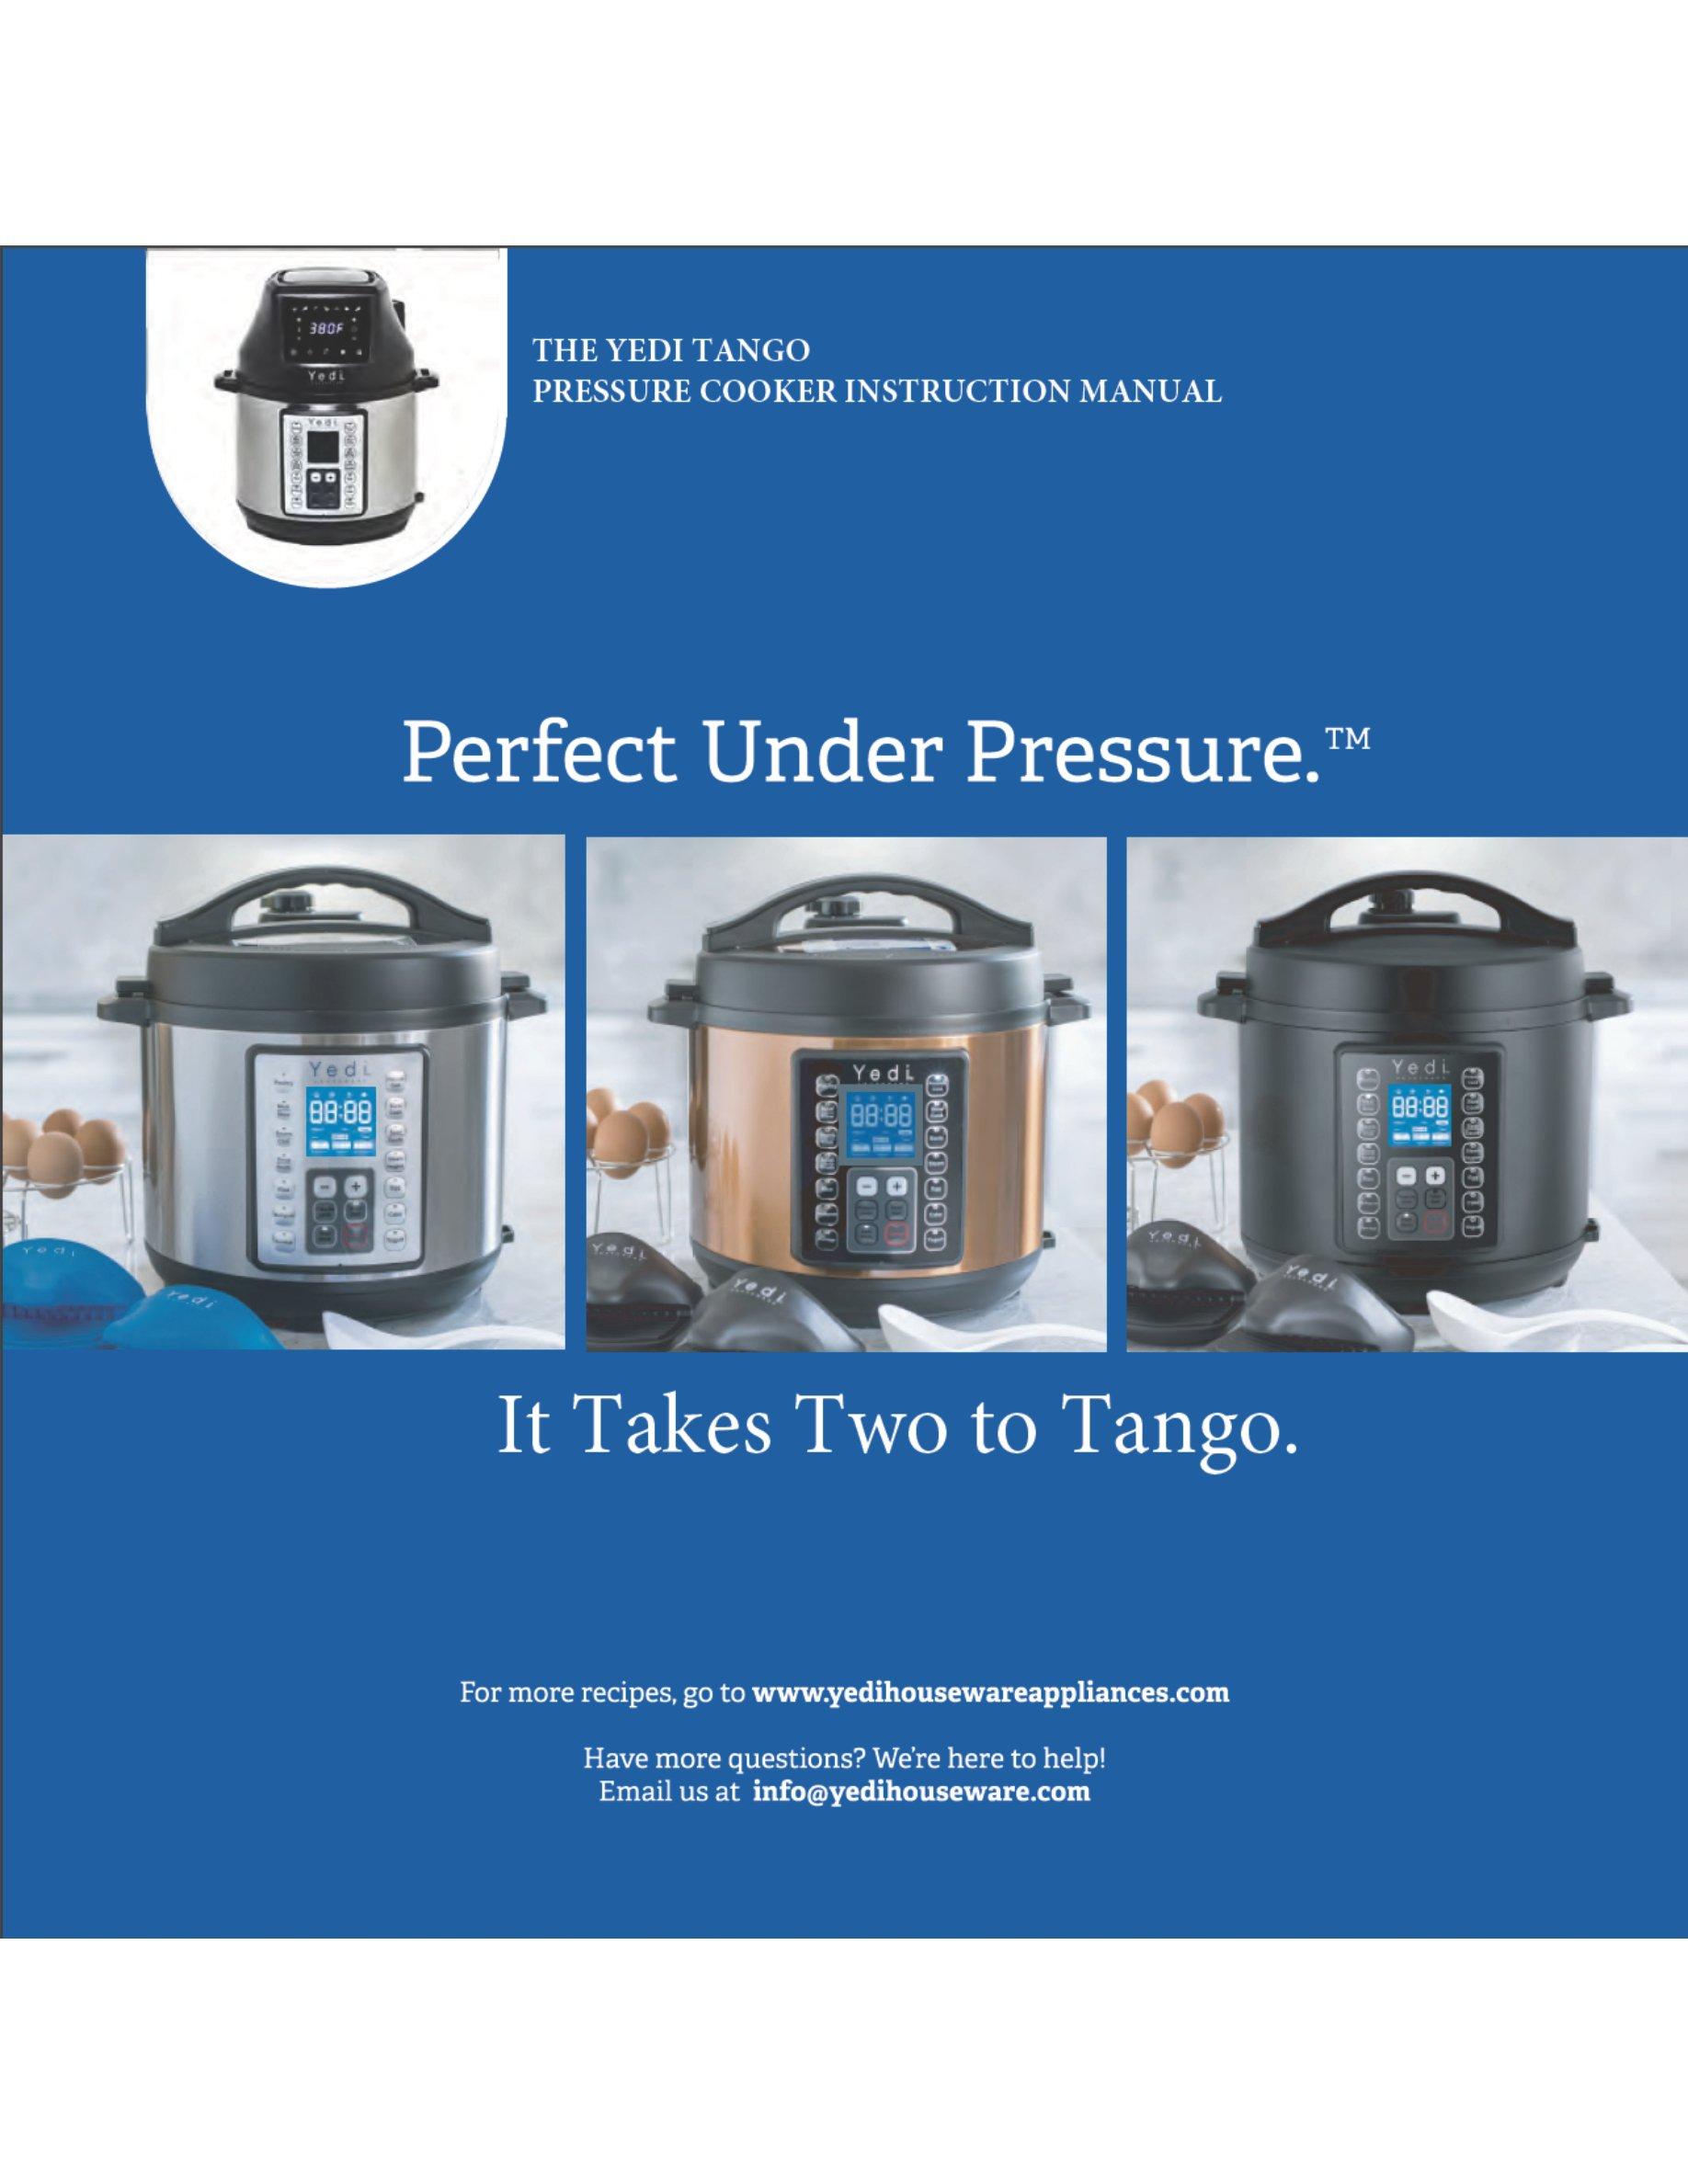 6 Quart with Deluxe Accessory kit 2-in-1 Air Fryer and Pressure Cooker Yedi Tango 